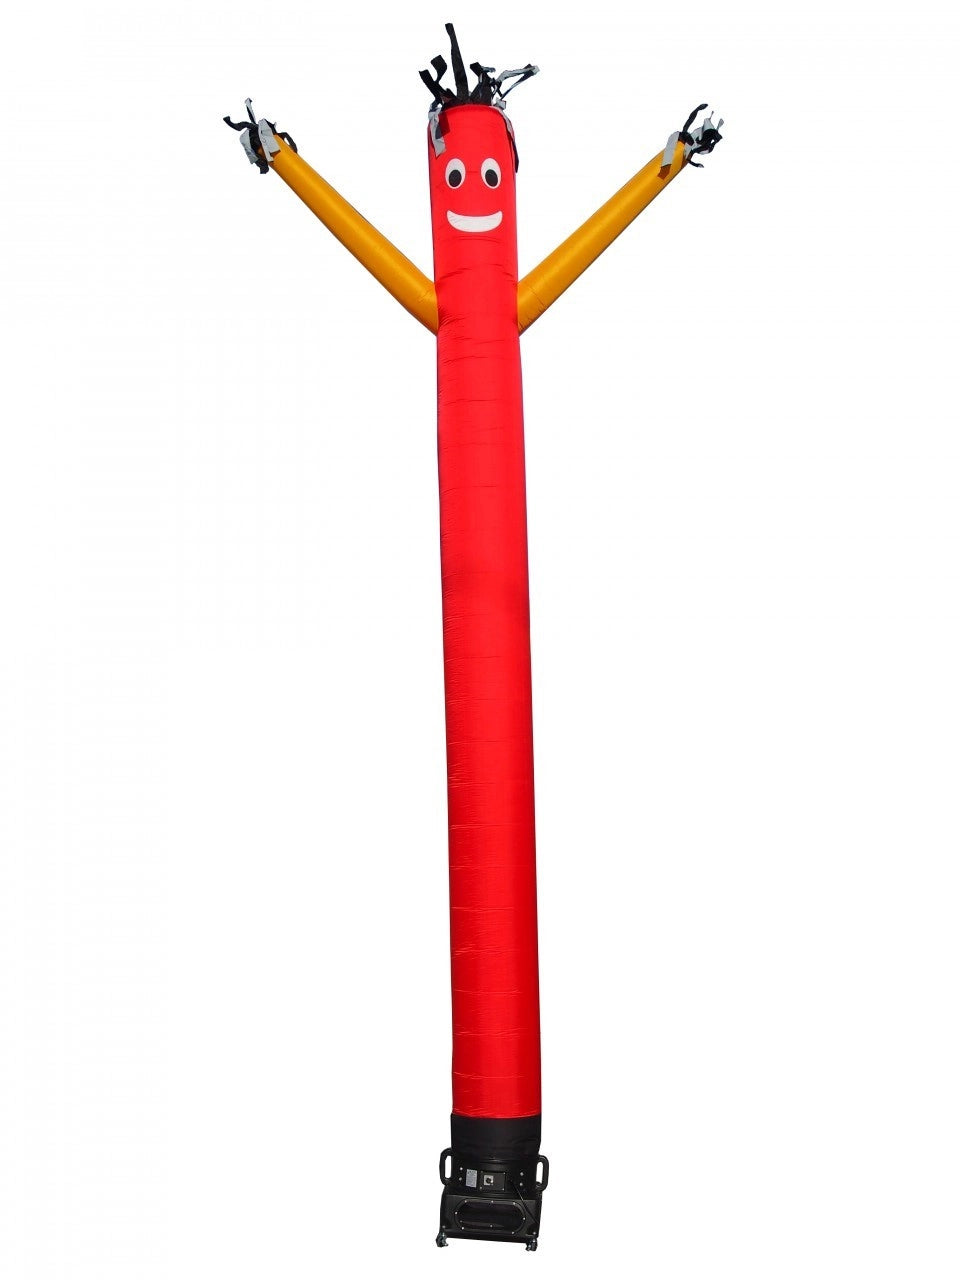 20ft Air Dancer Red with Yellow Arms Inflatable Tube Man